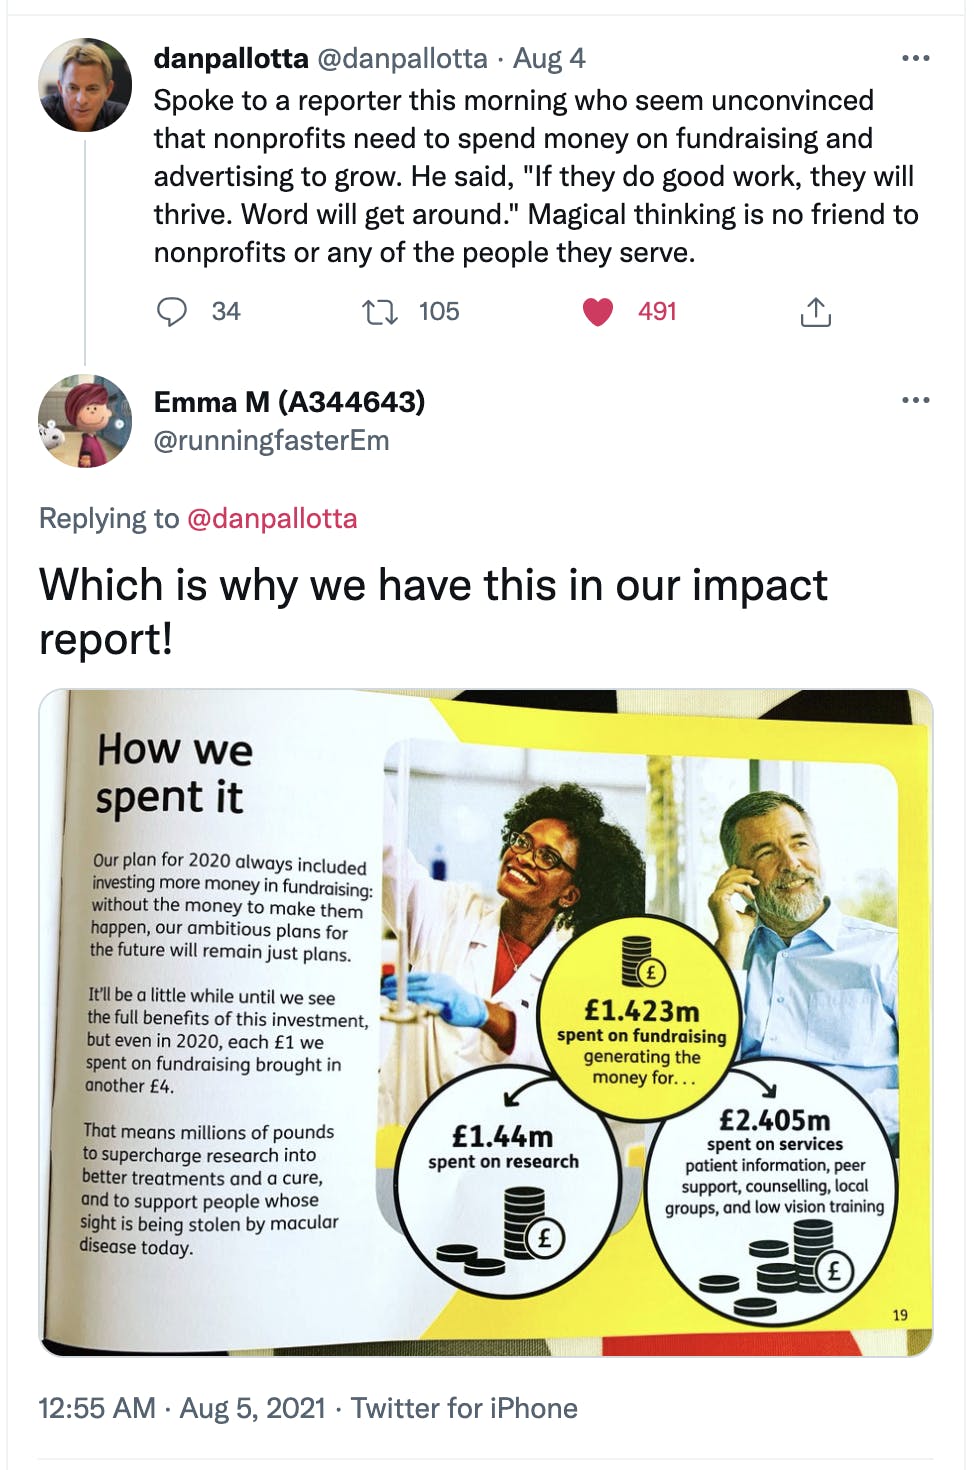 a tweet showing one page in an impact report to show how they are investing in fundraising to grow their organization